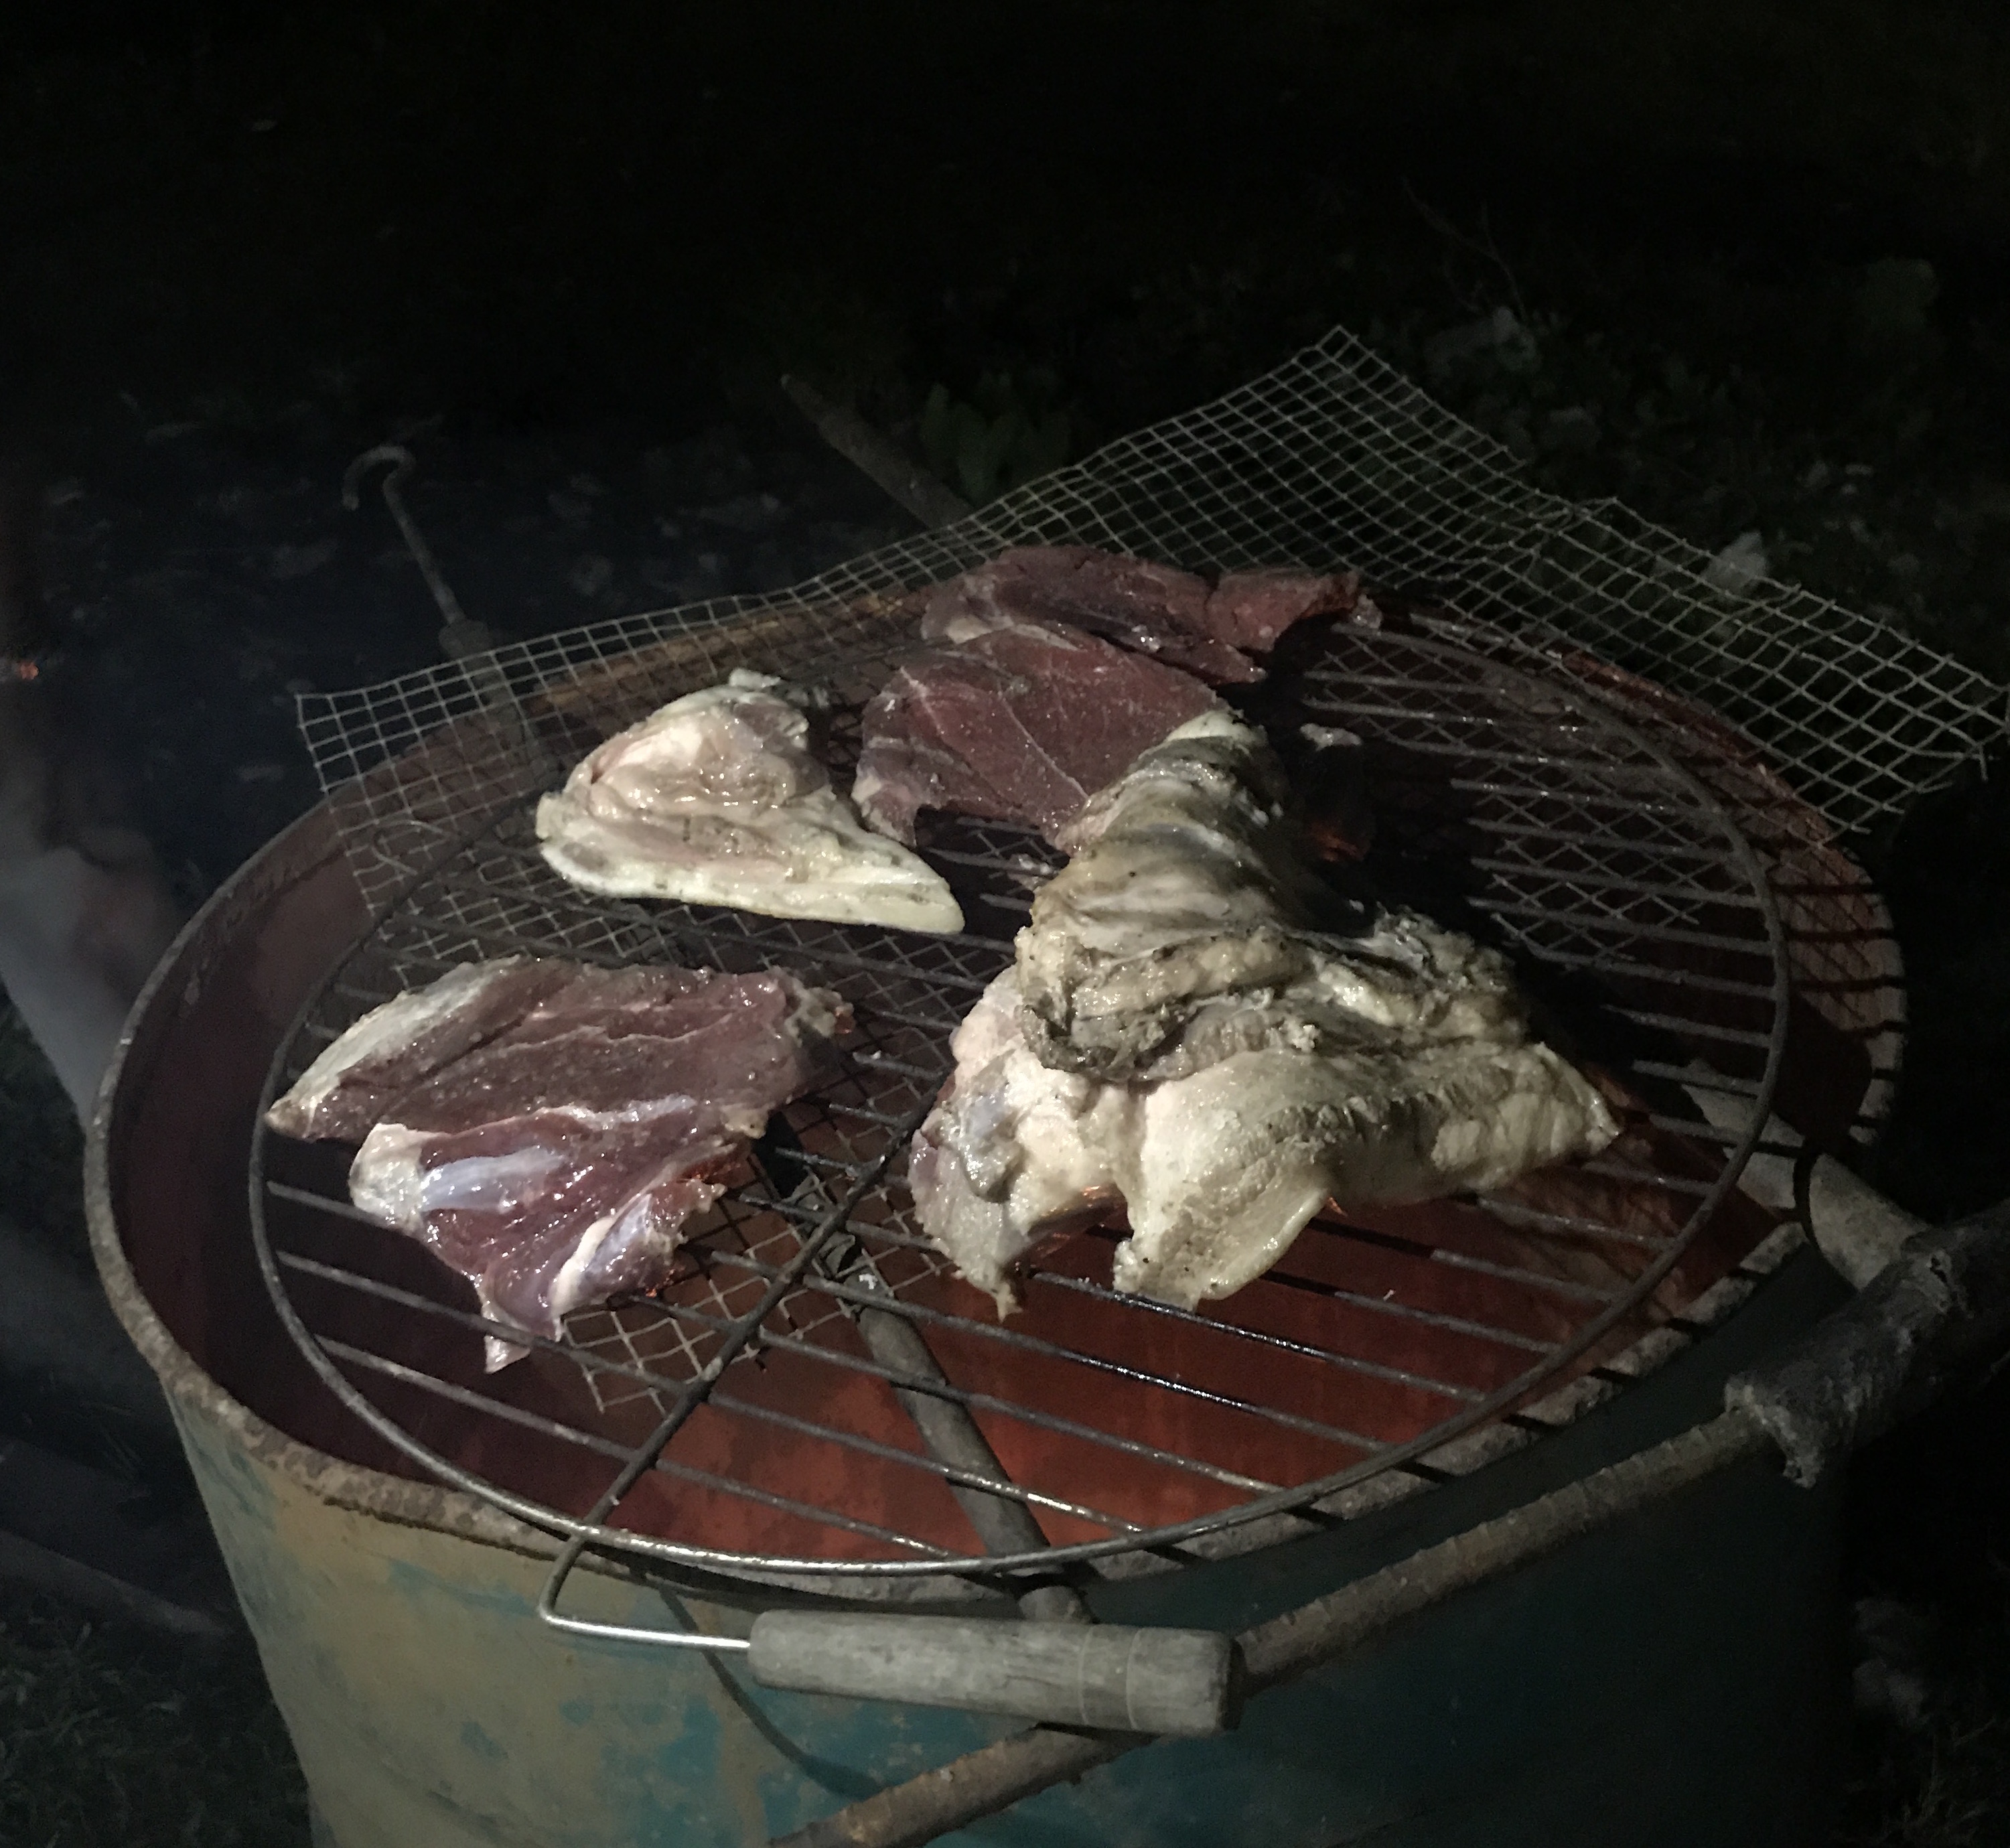 Pig meat on an open barbeque